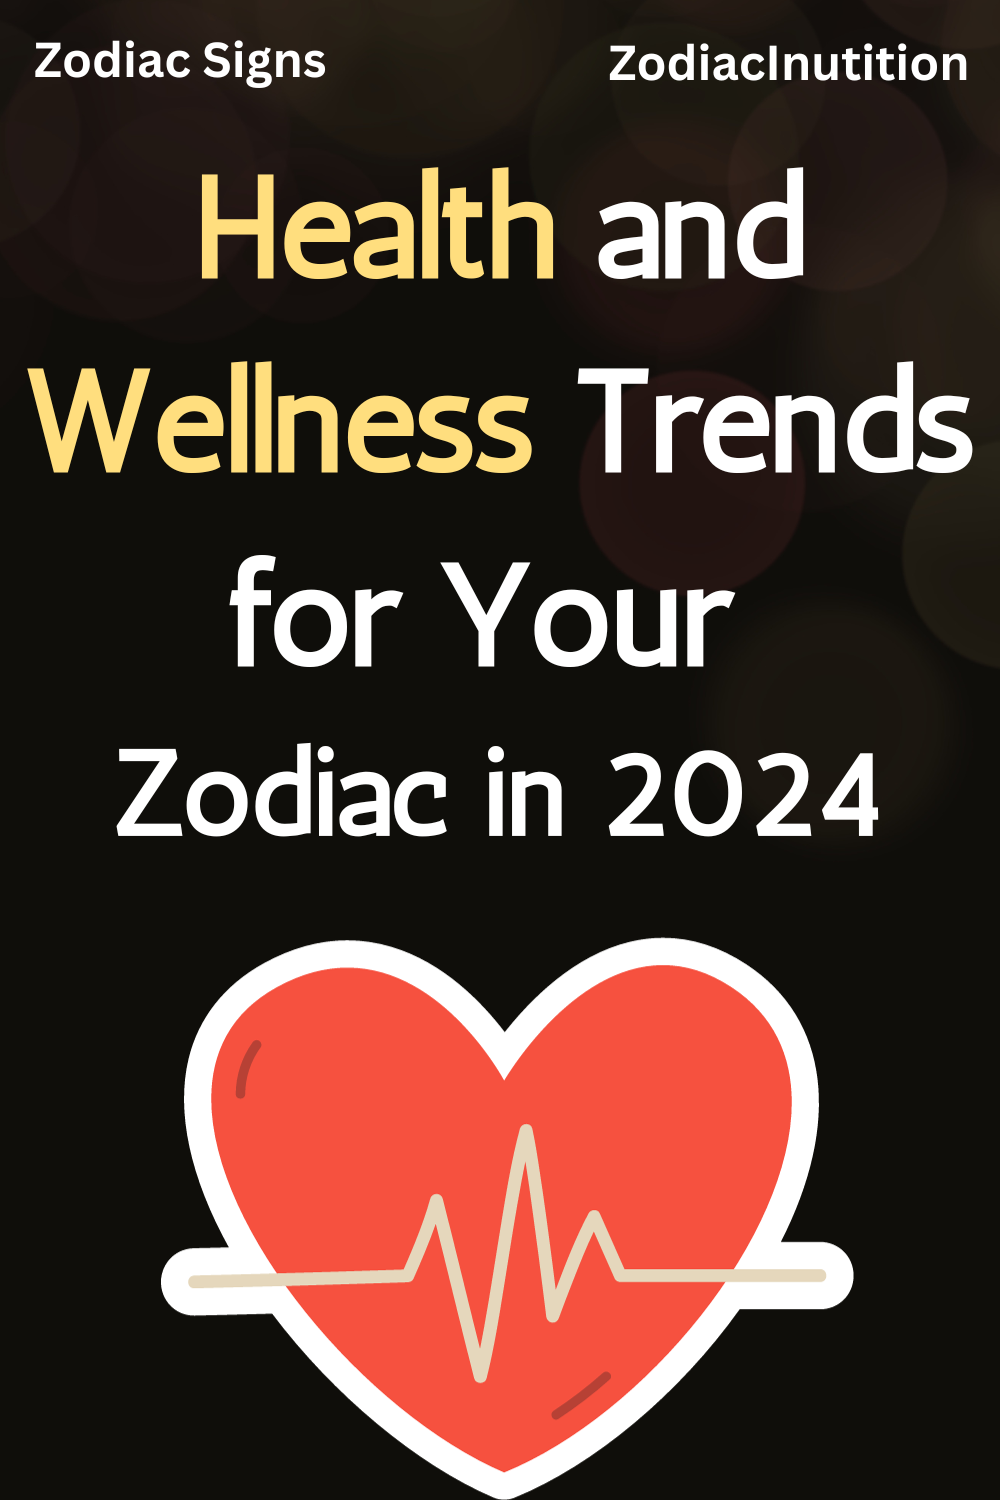 Health and Wellness Trends for Your Zodiac in 2024